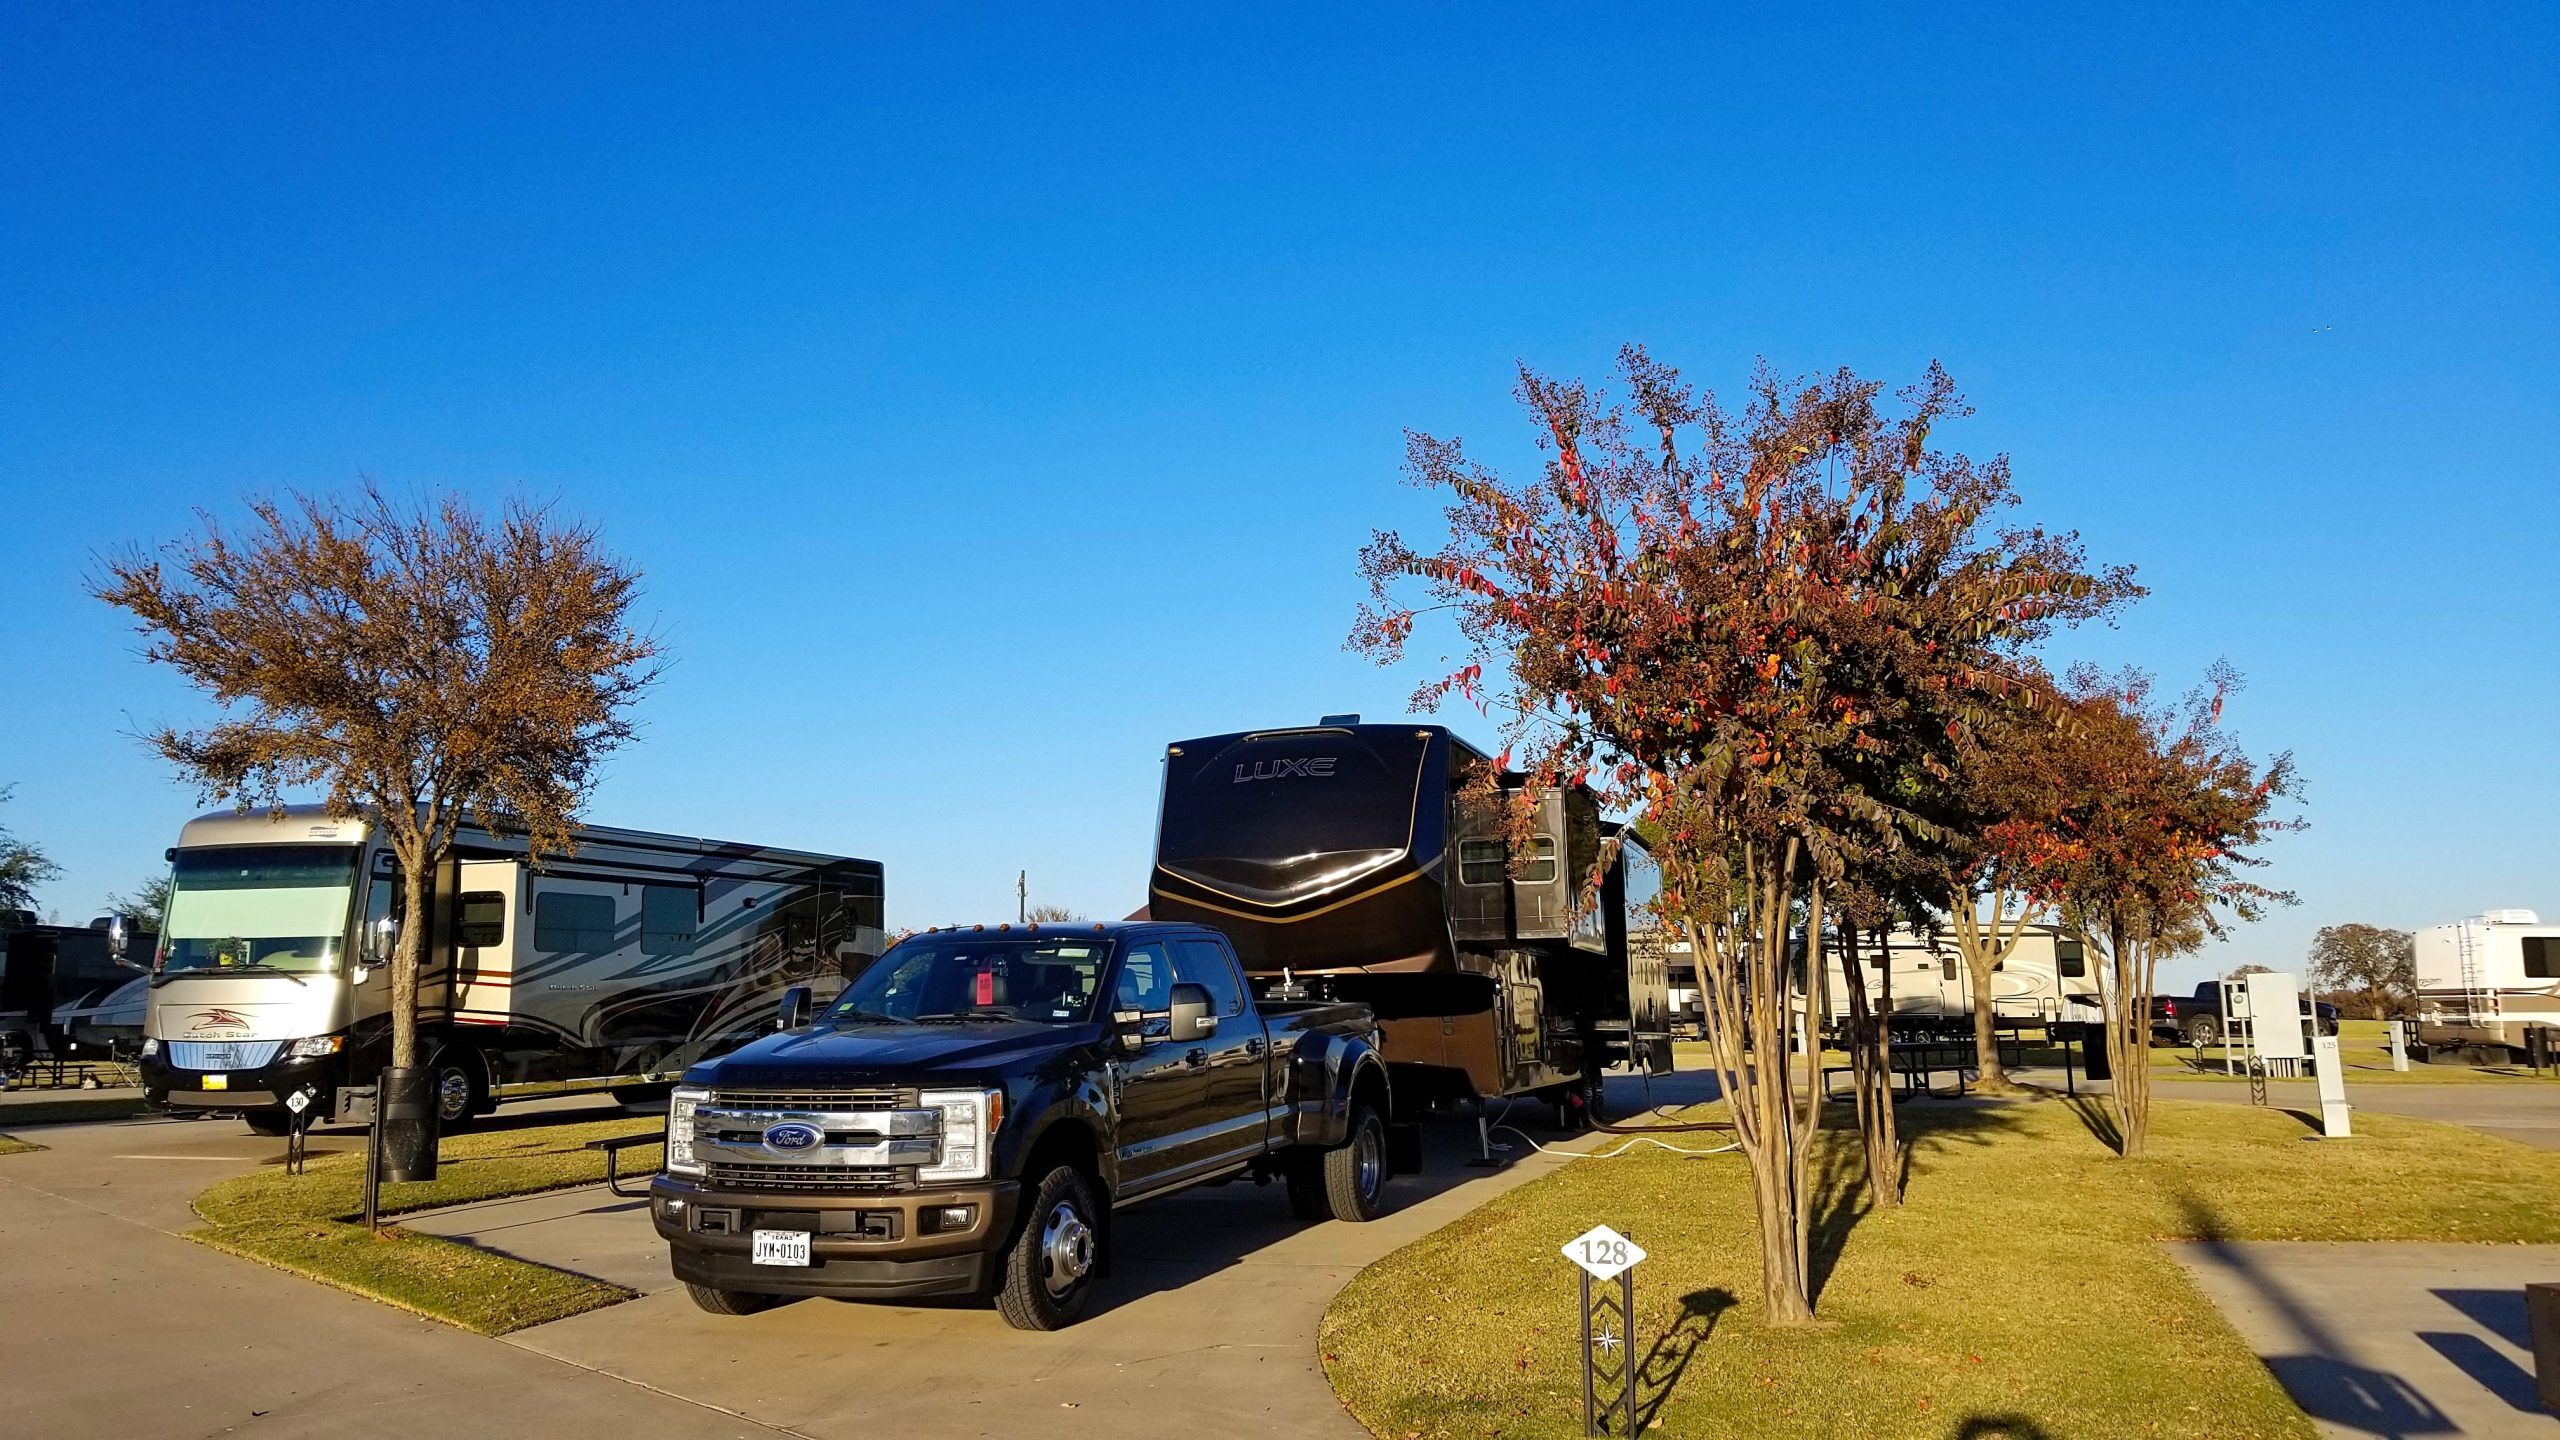 Fun Town RV Park at WinStar, Thackerville, OK Keep Up With The Joneses